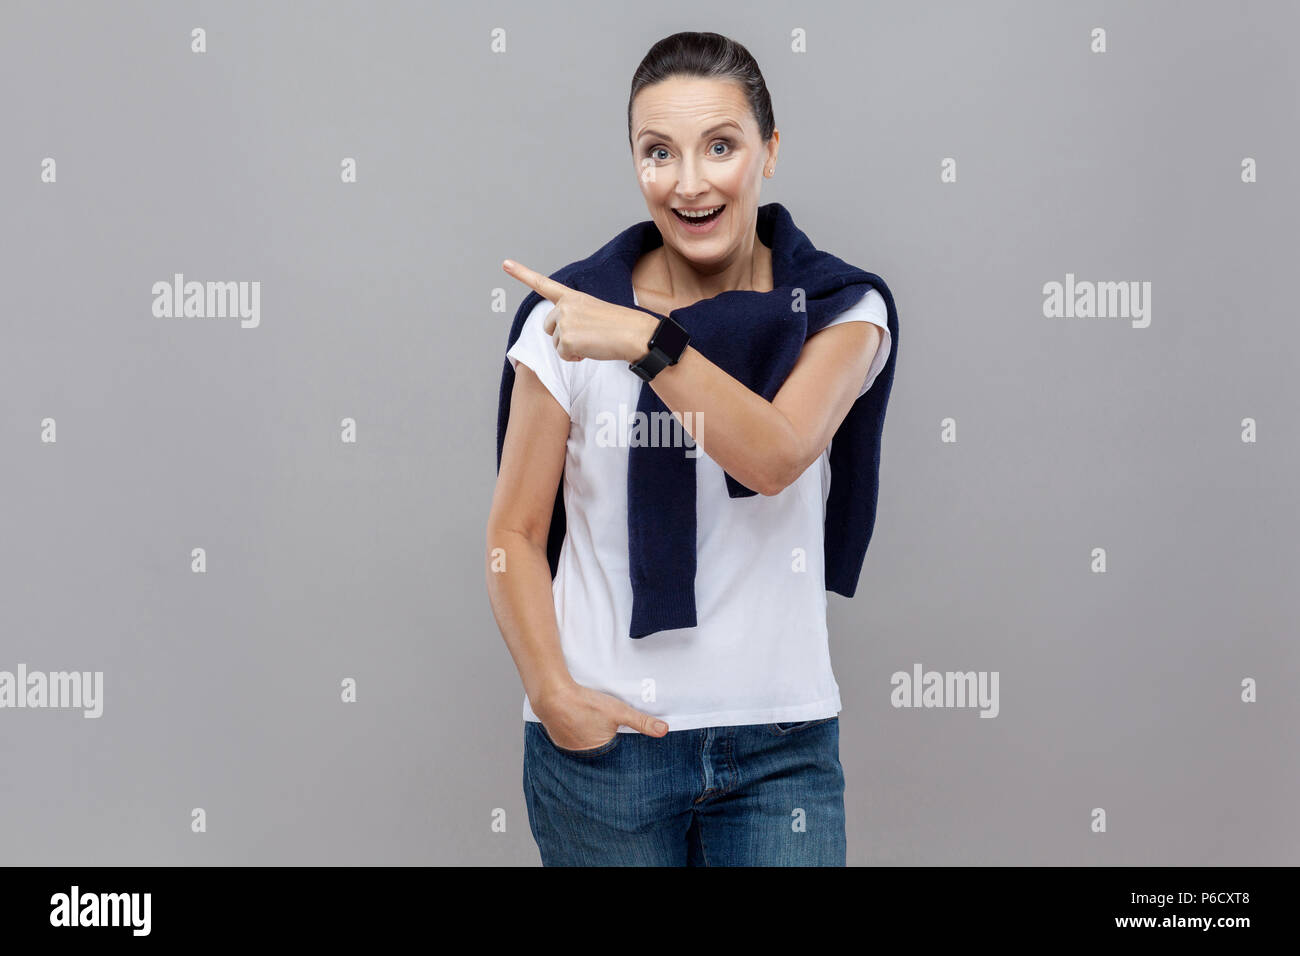 Look this! Hand finger pointing isolated on grey background with blue jeans and sweater on her shoulders, smart watch on arm,. Isolated studio shot Stock Photo